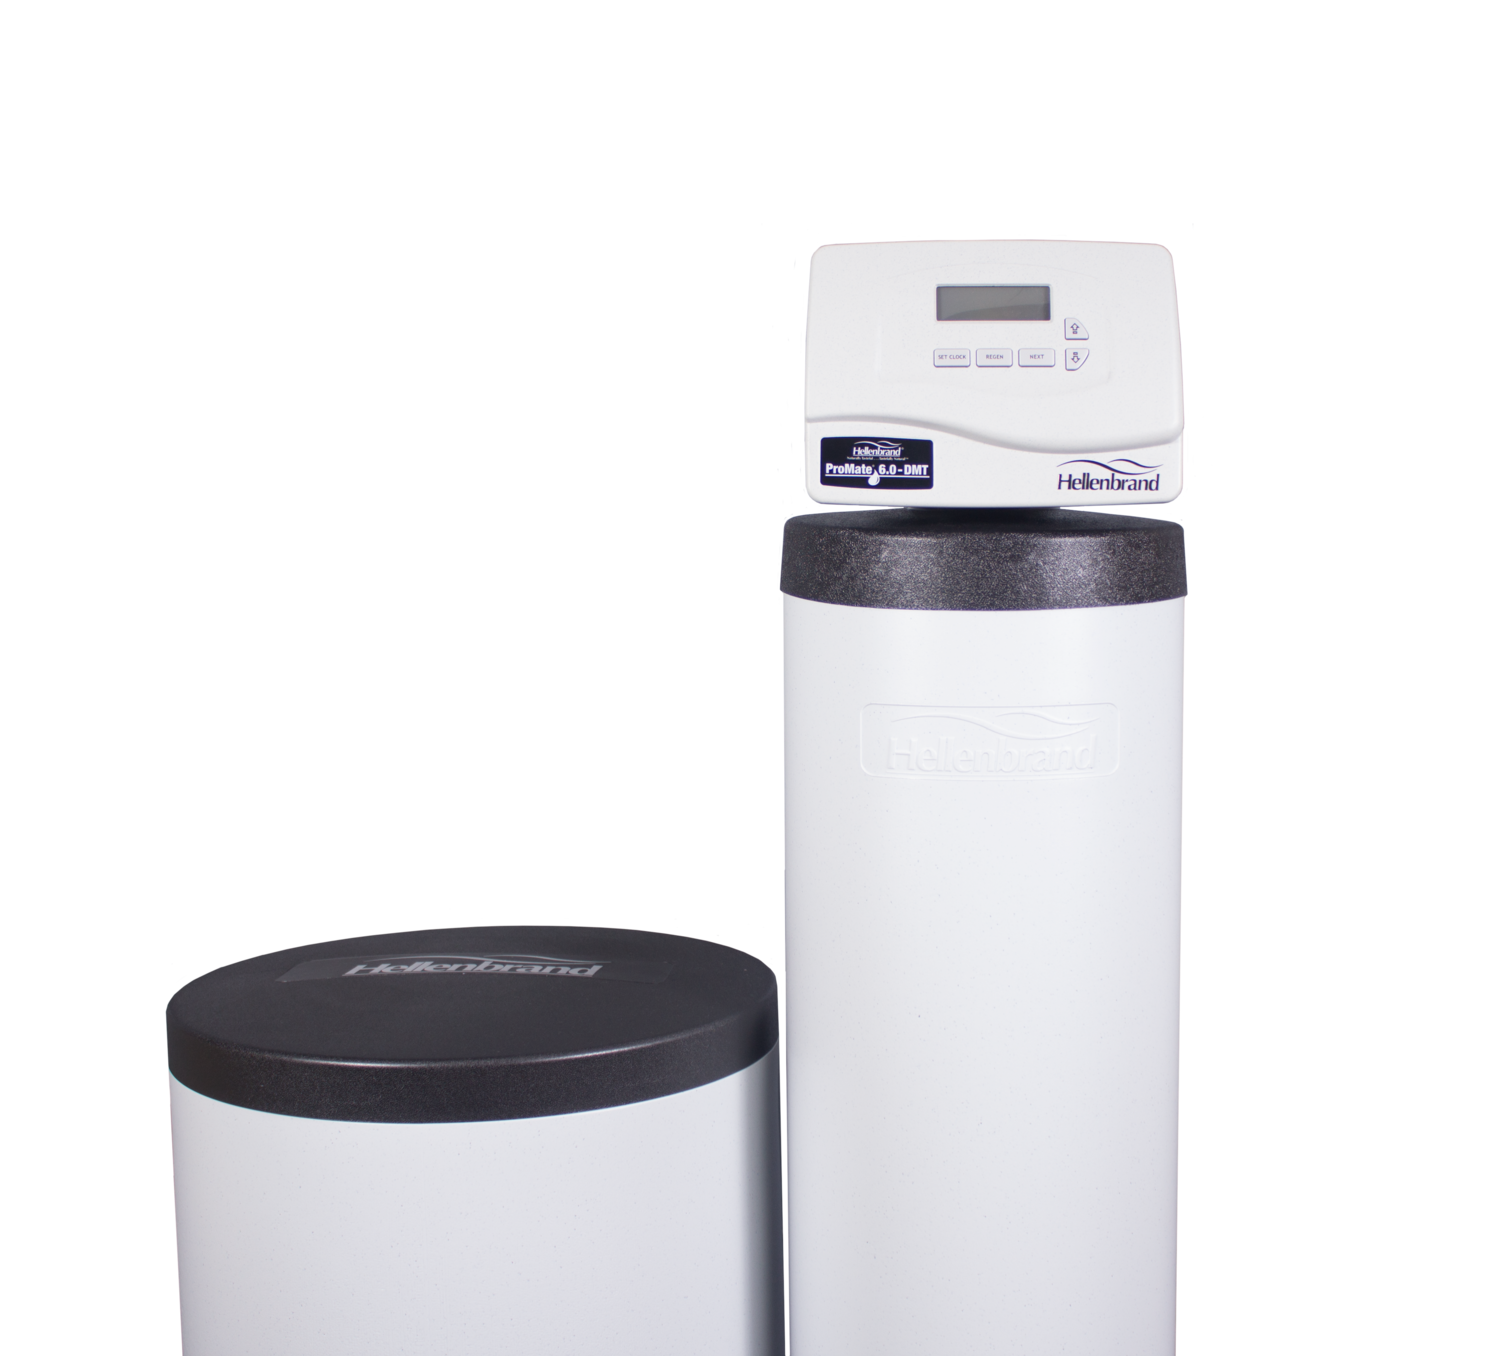 ProMate 6.0 DMT Water Softener